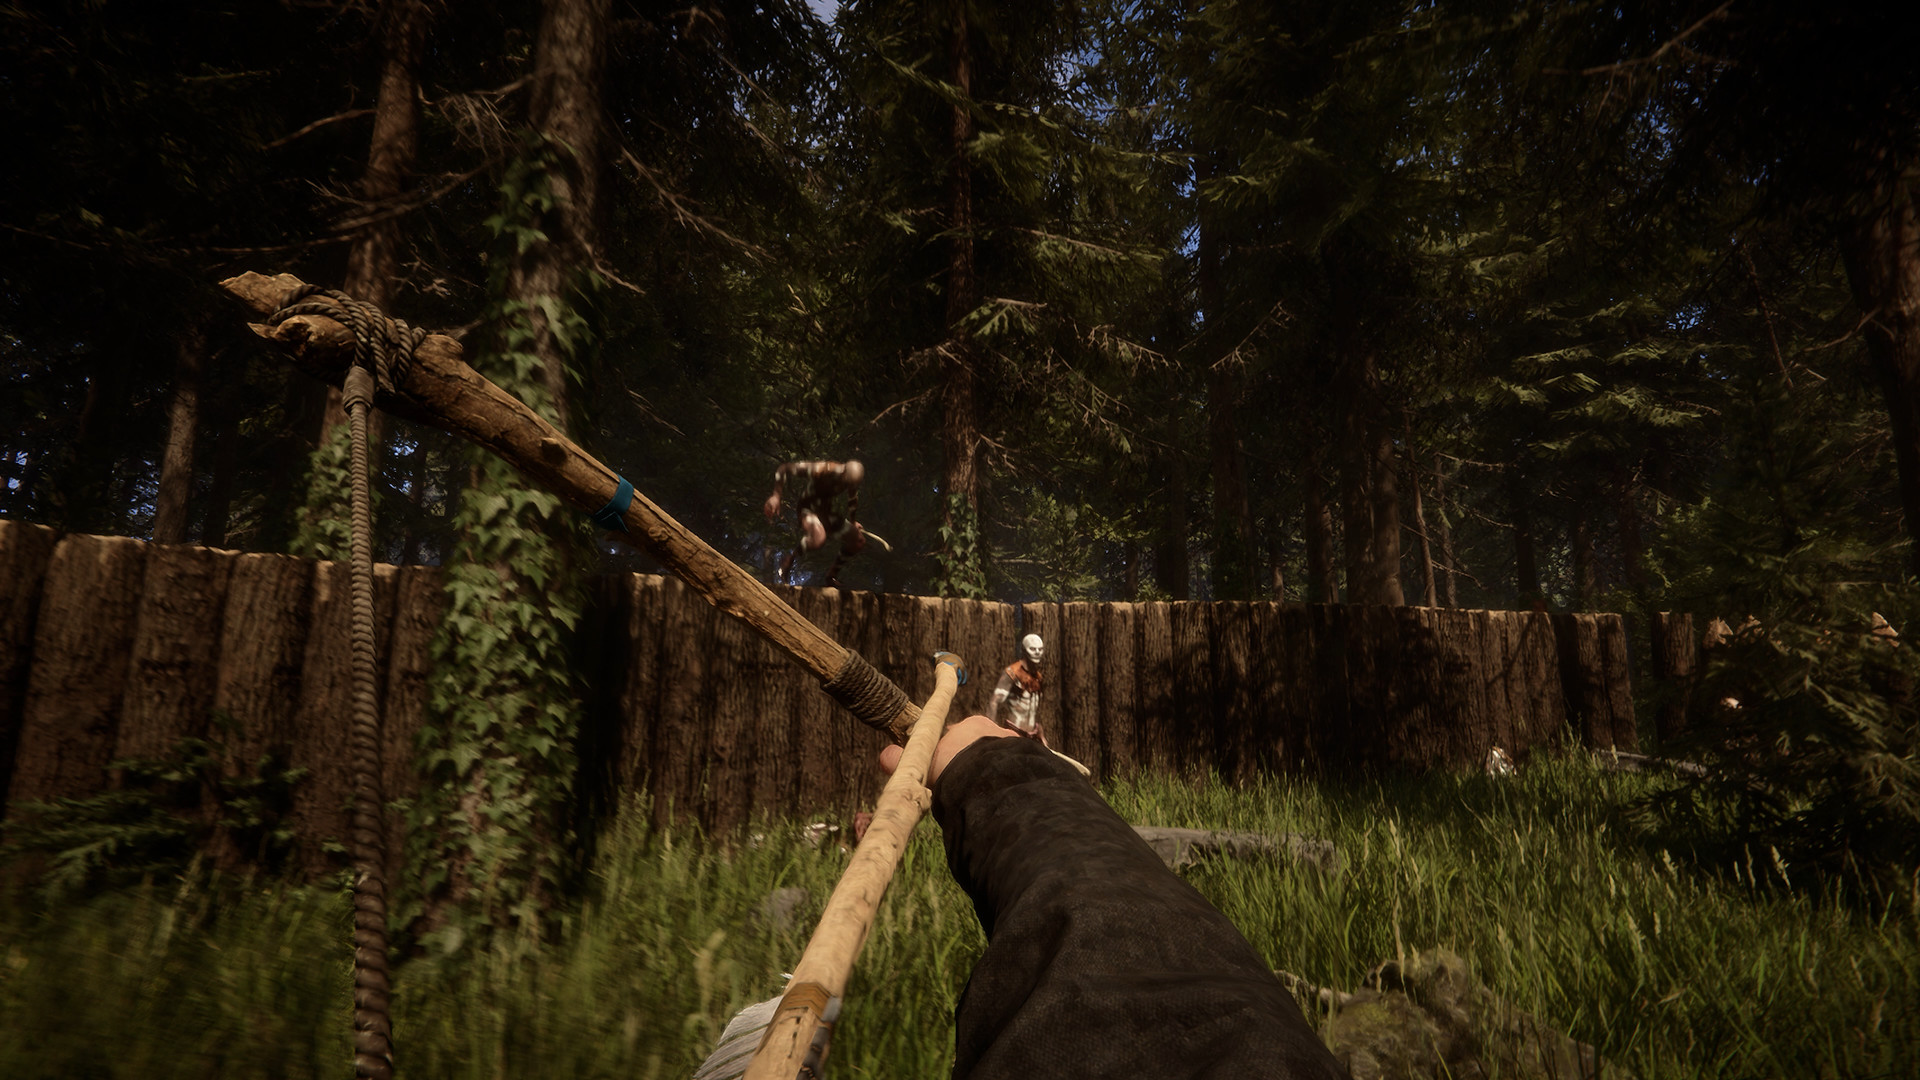 Sons of the Forest: Release on February 23, initially as Early Access - News